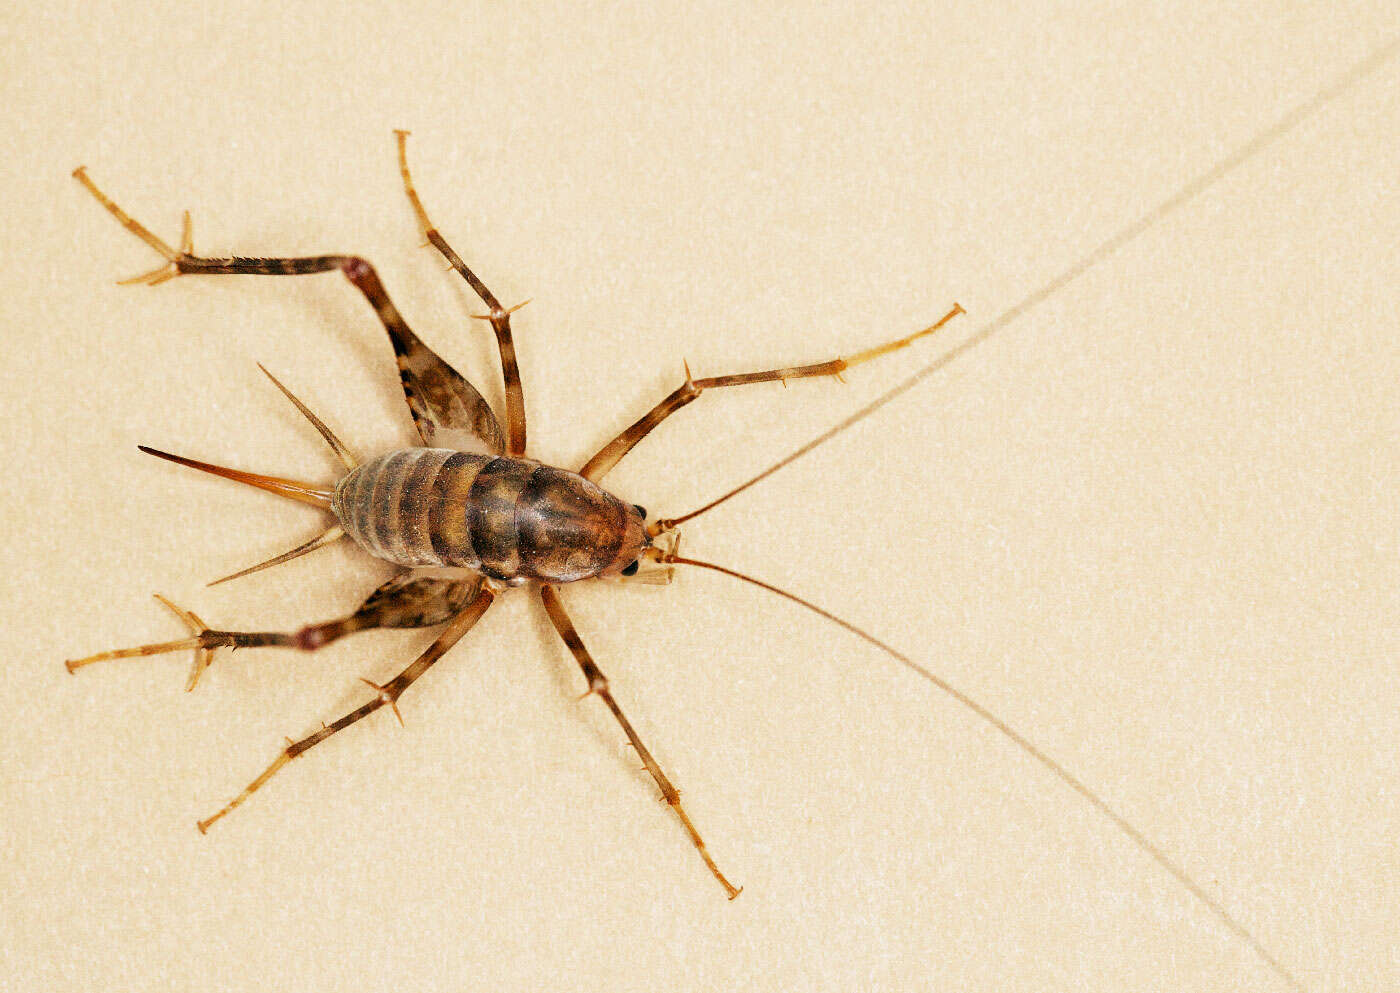 Image of camel crickets